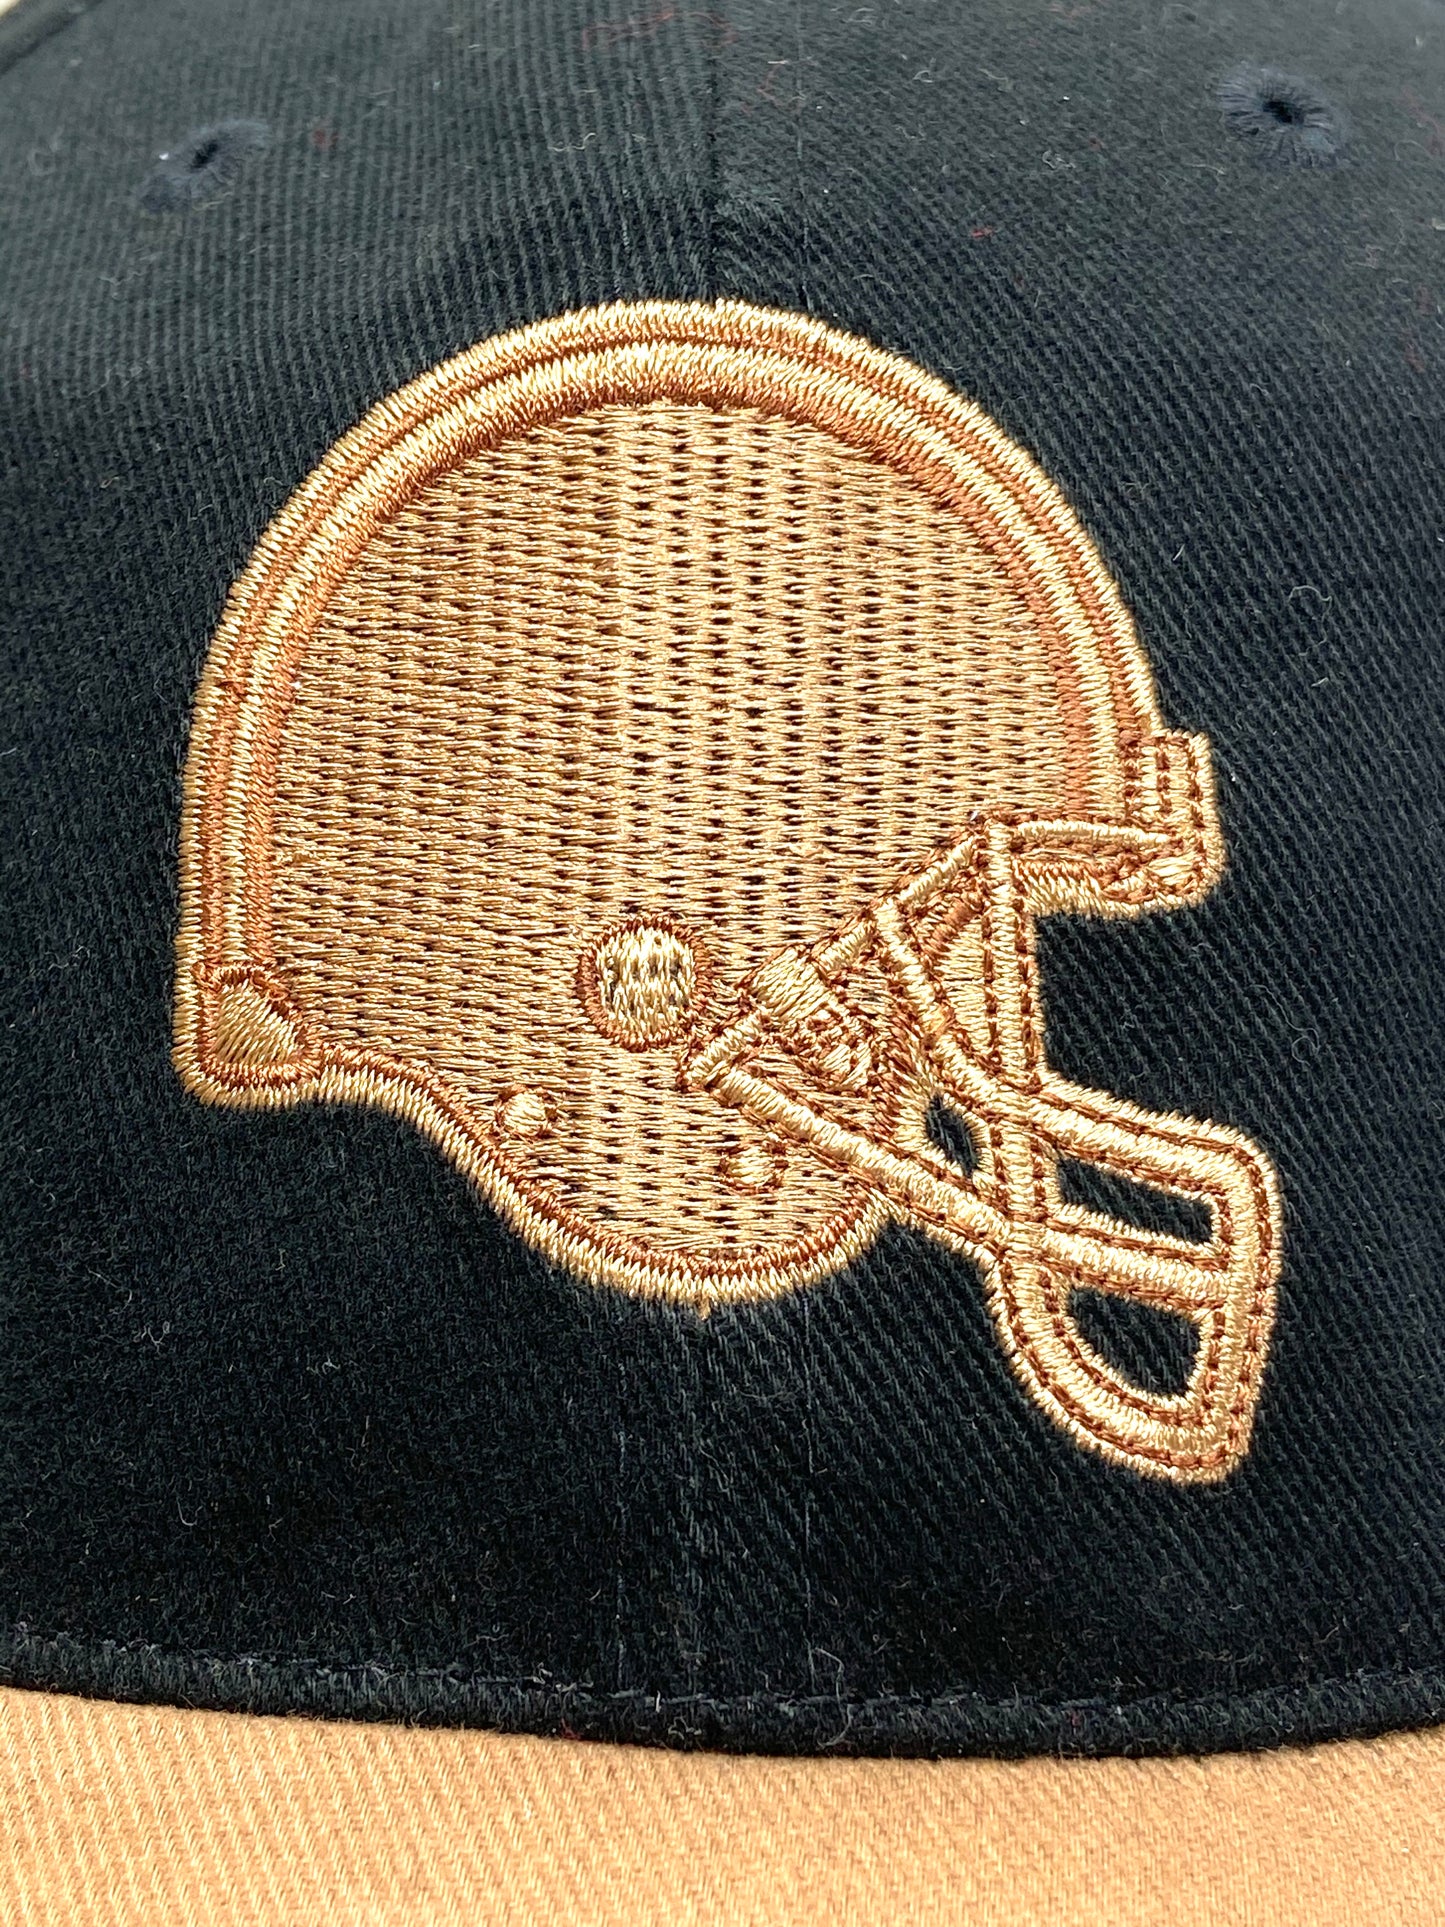 Cleveland Browns Vintage NFL Tan Logo On Black Cap by American Needle